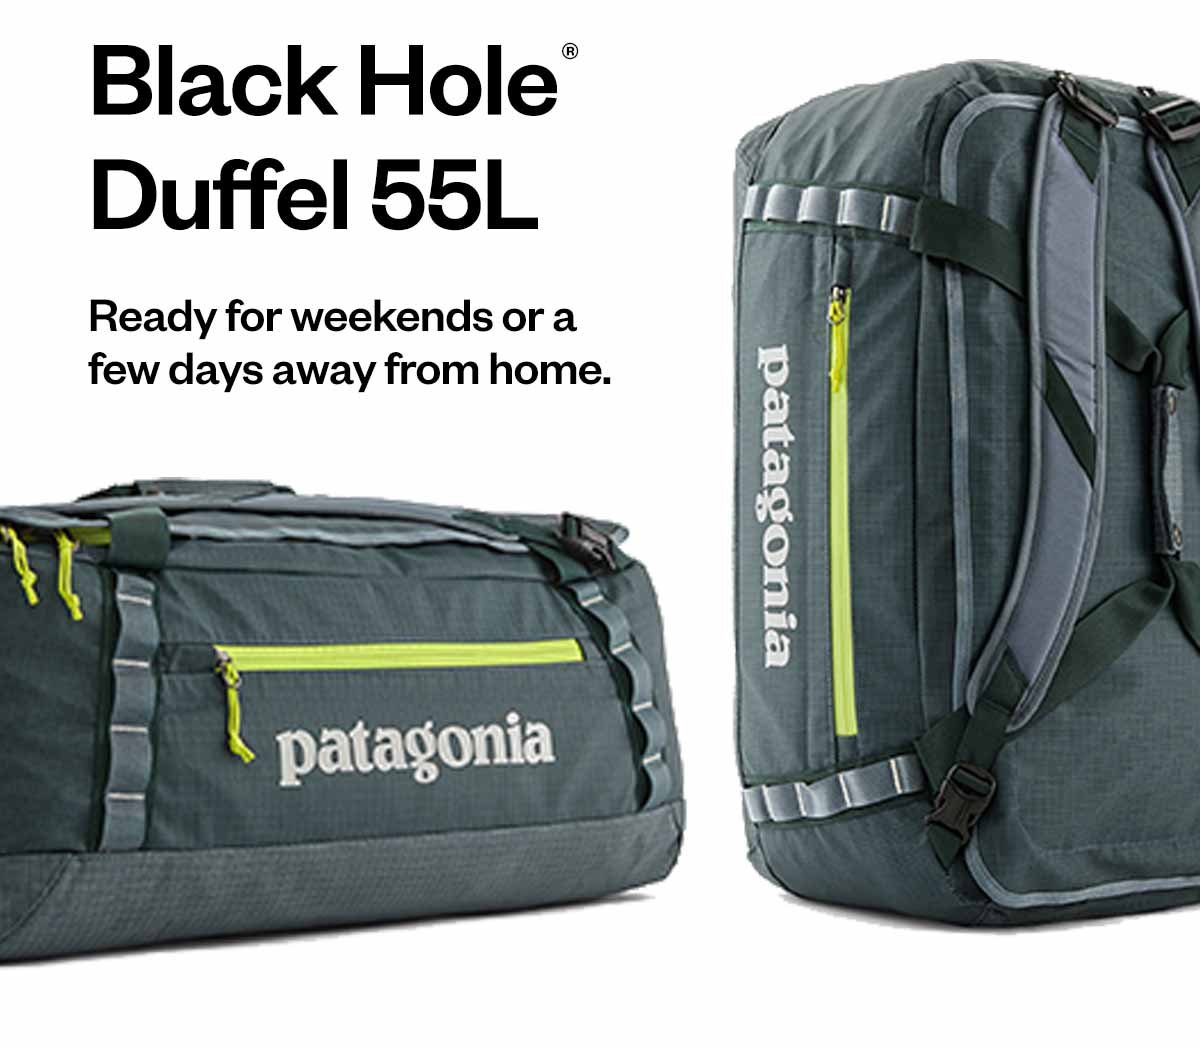 Black Hole® Duffel 55 liter. Ready for weekends or a few days away from home.